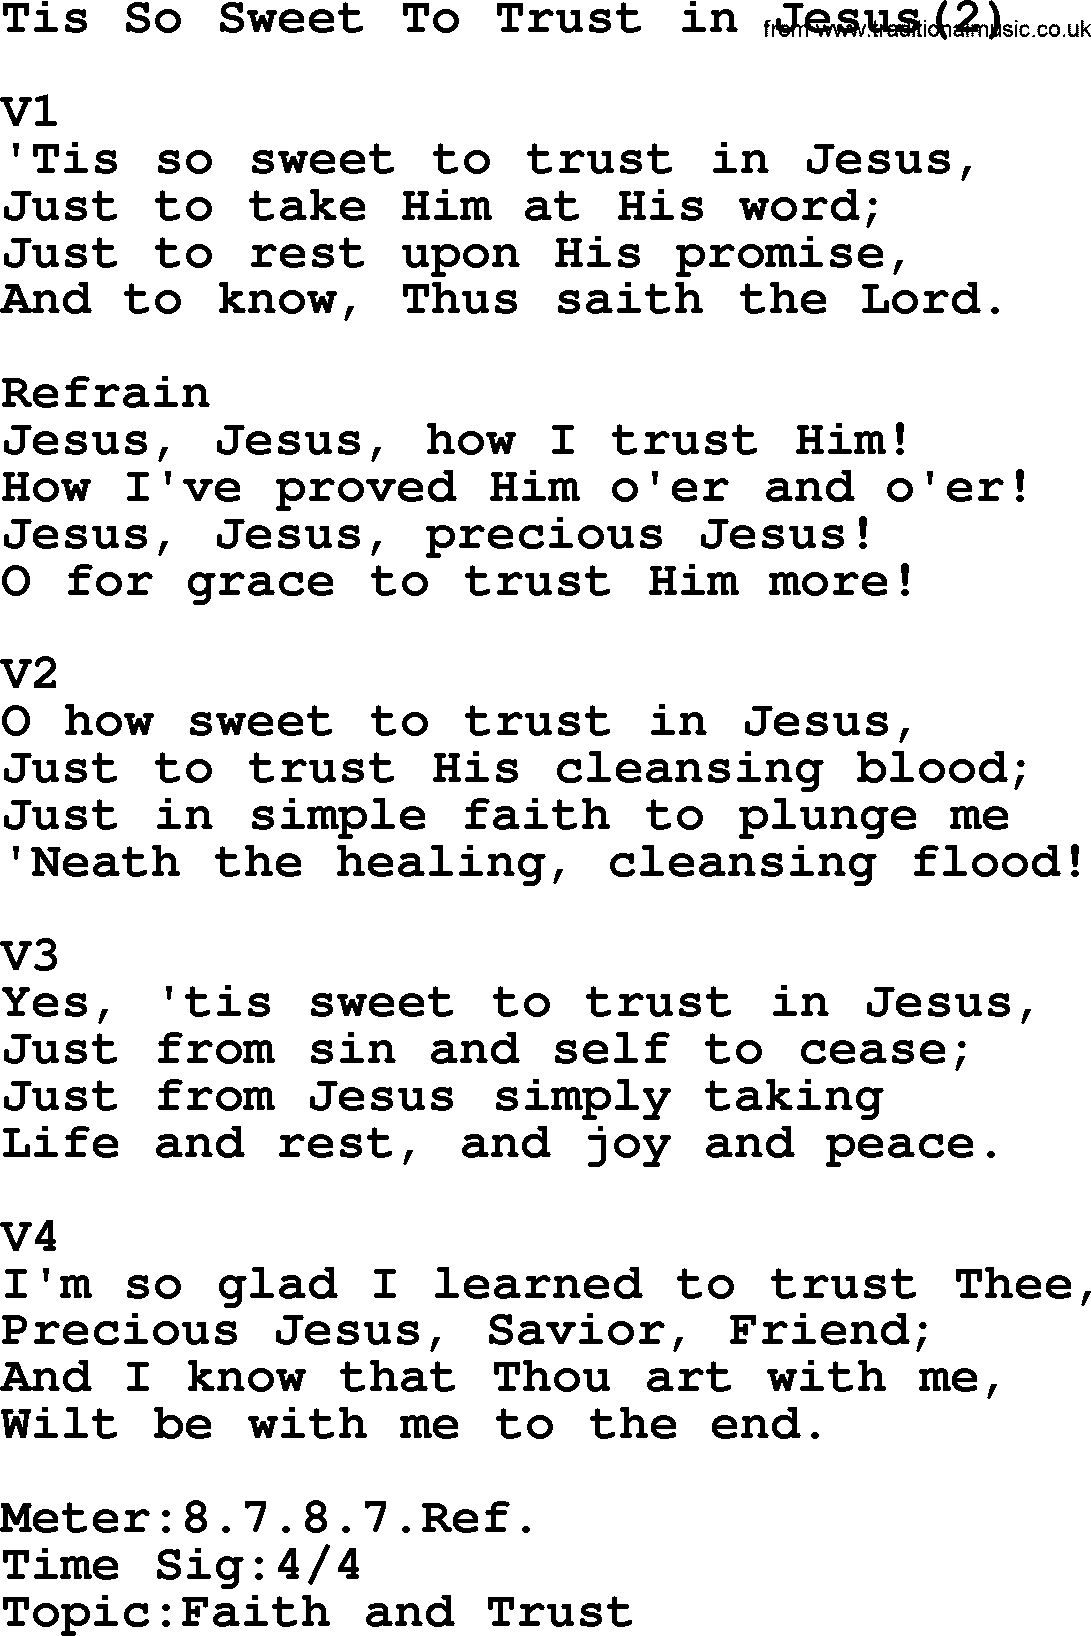 Adventist Hynms collection, Hymn: Tis So Sweet To Trust In Jesus(2), lyrics with PDF